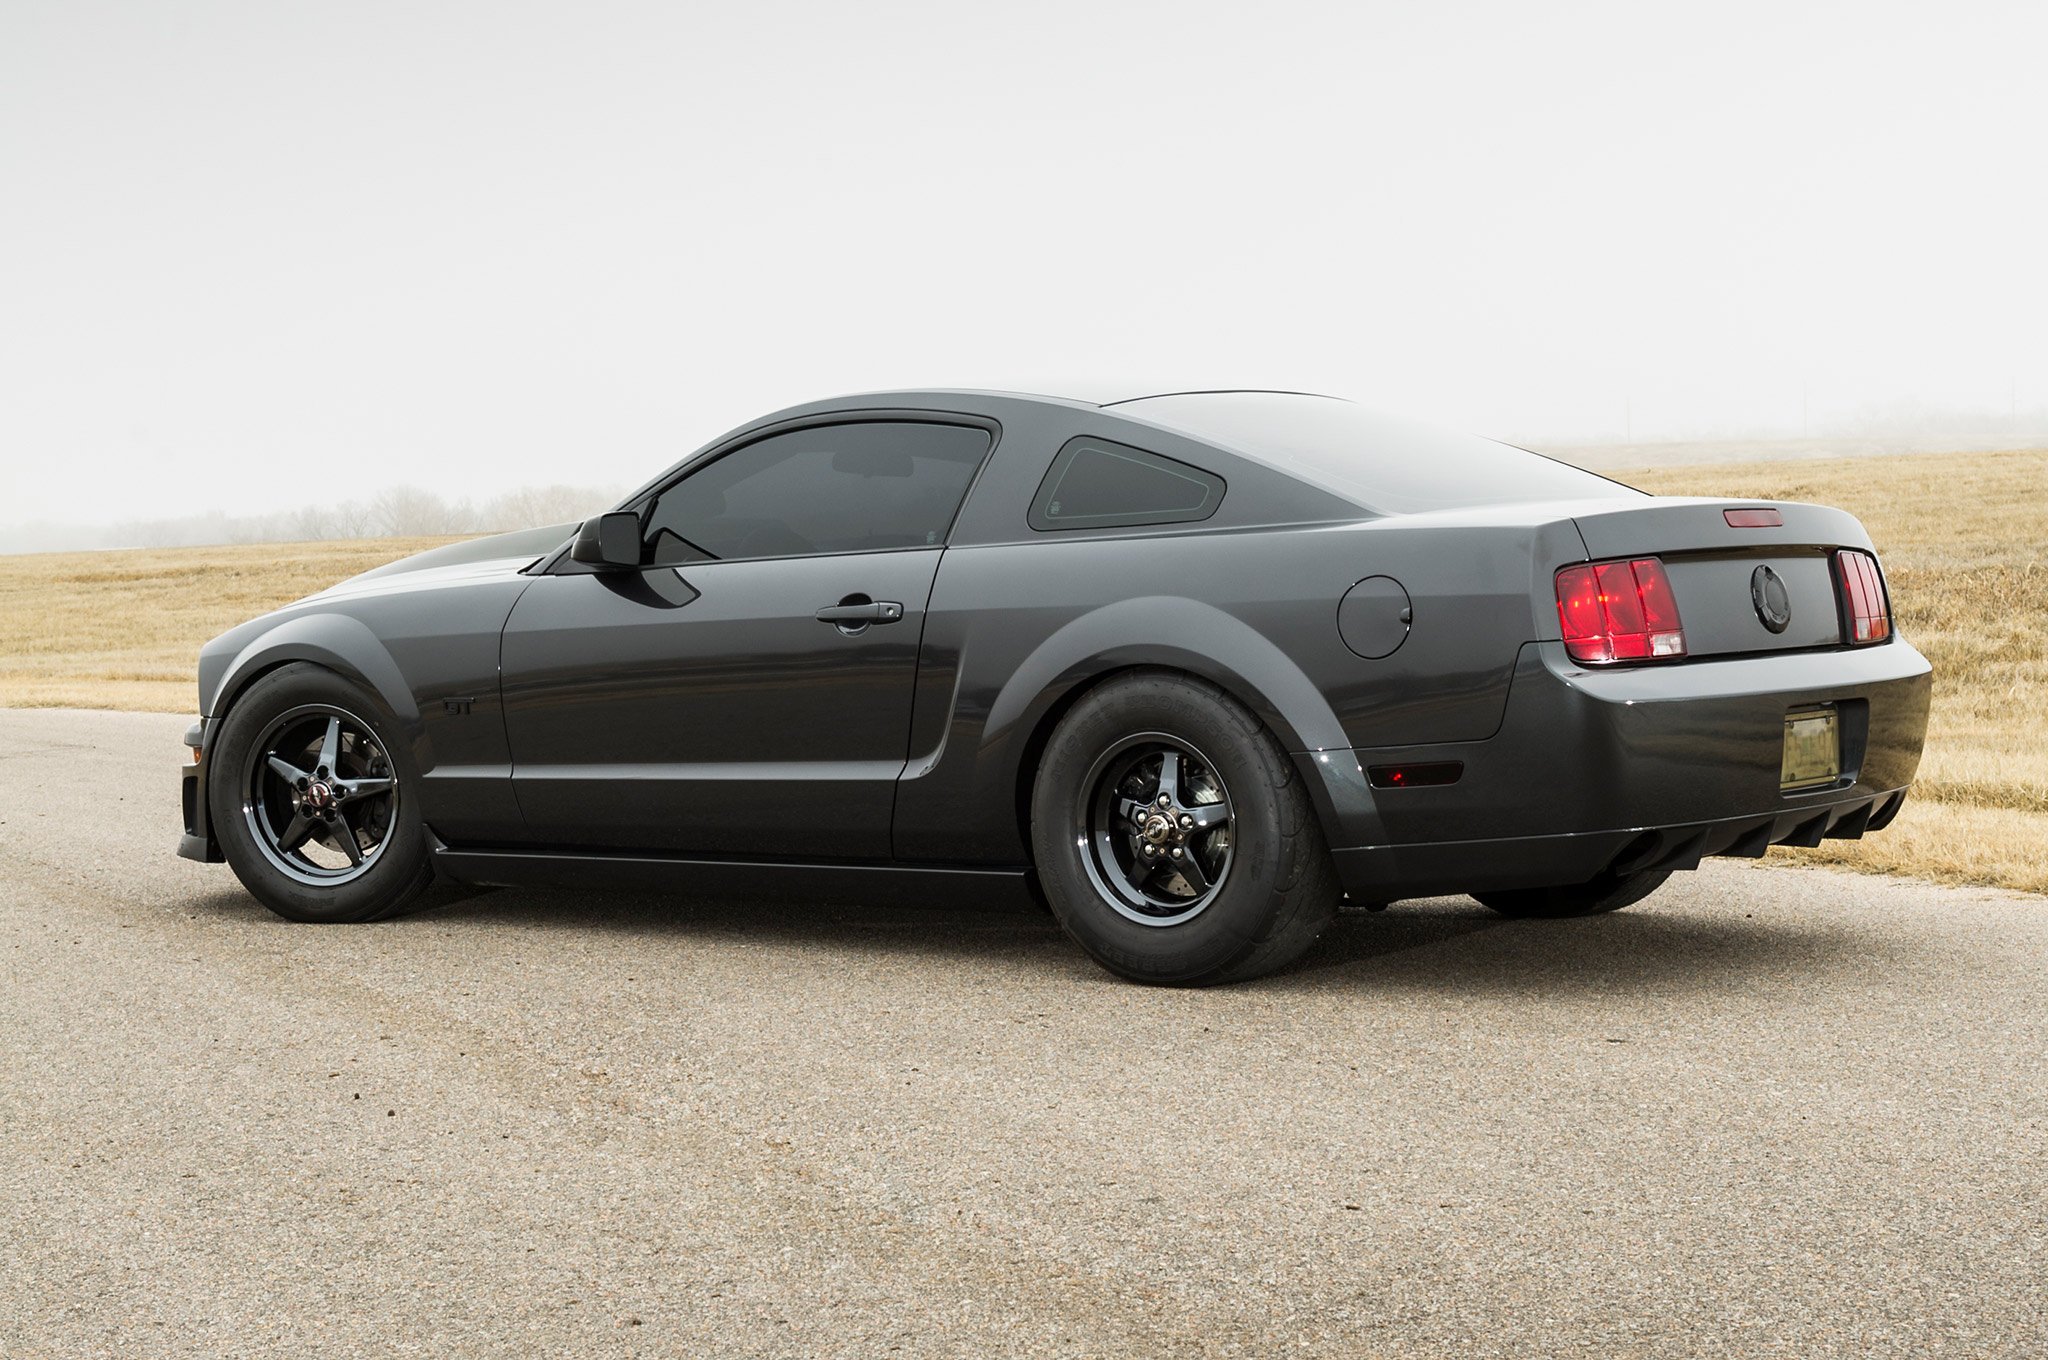 2007, Ford, Mustang, Gt, Pro, Street, Super, Drag, Muscle, Usa, 2048x1360 11 Wallpaper